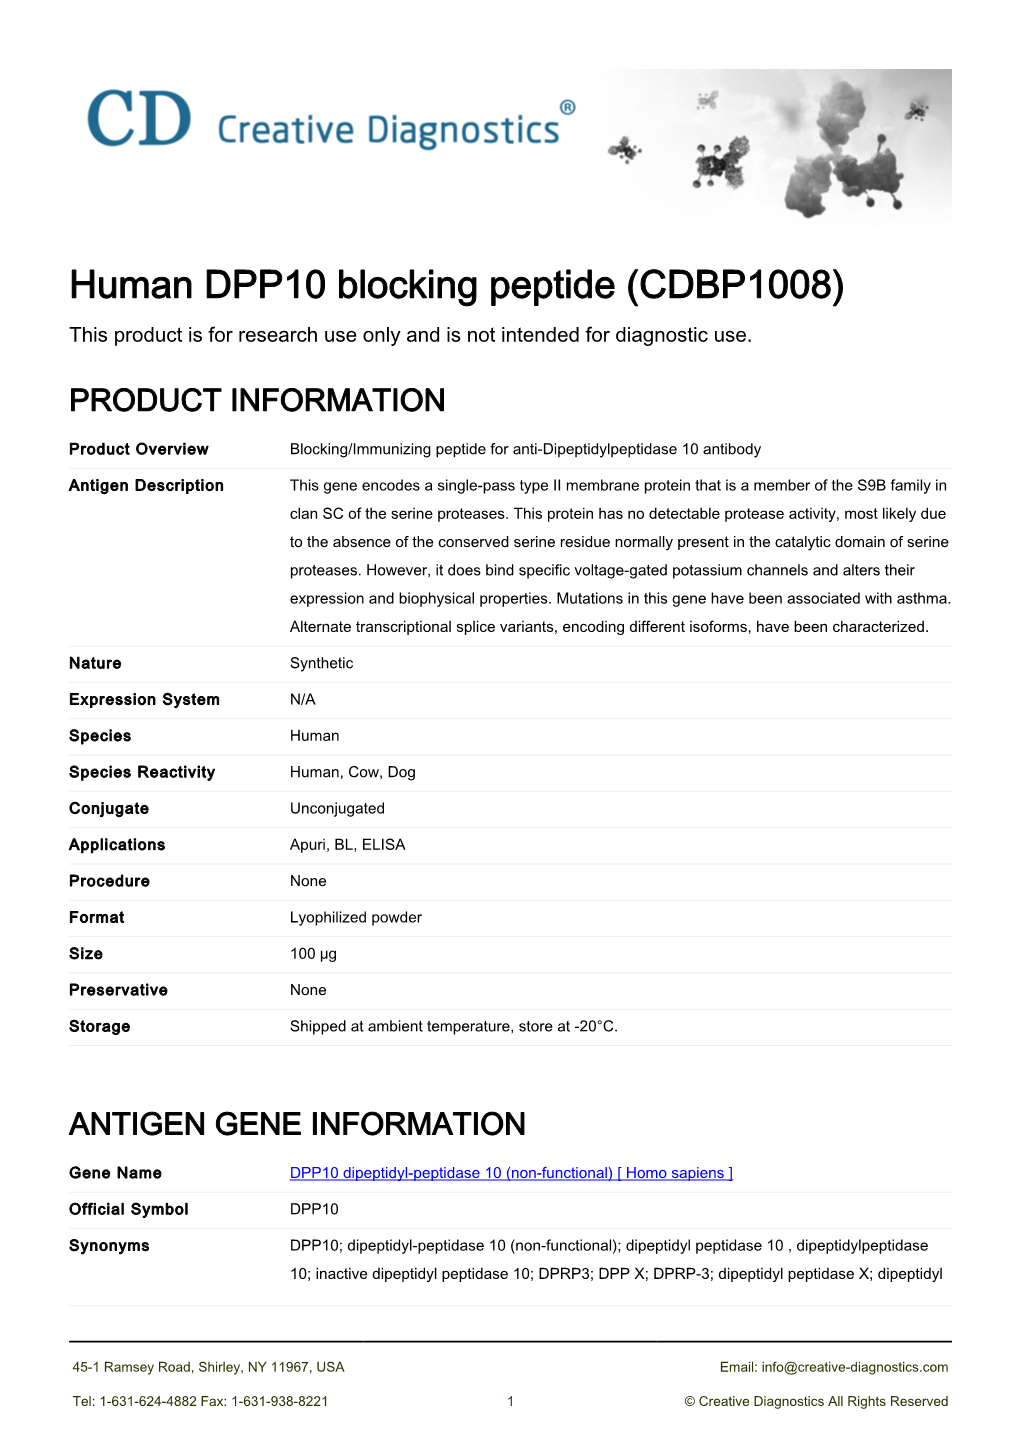 Human DPP10 Blocking Peptide (CDBP1008) This Product Is for Research Use Only and Is Not Intended for Diagnostic Use